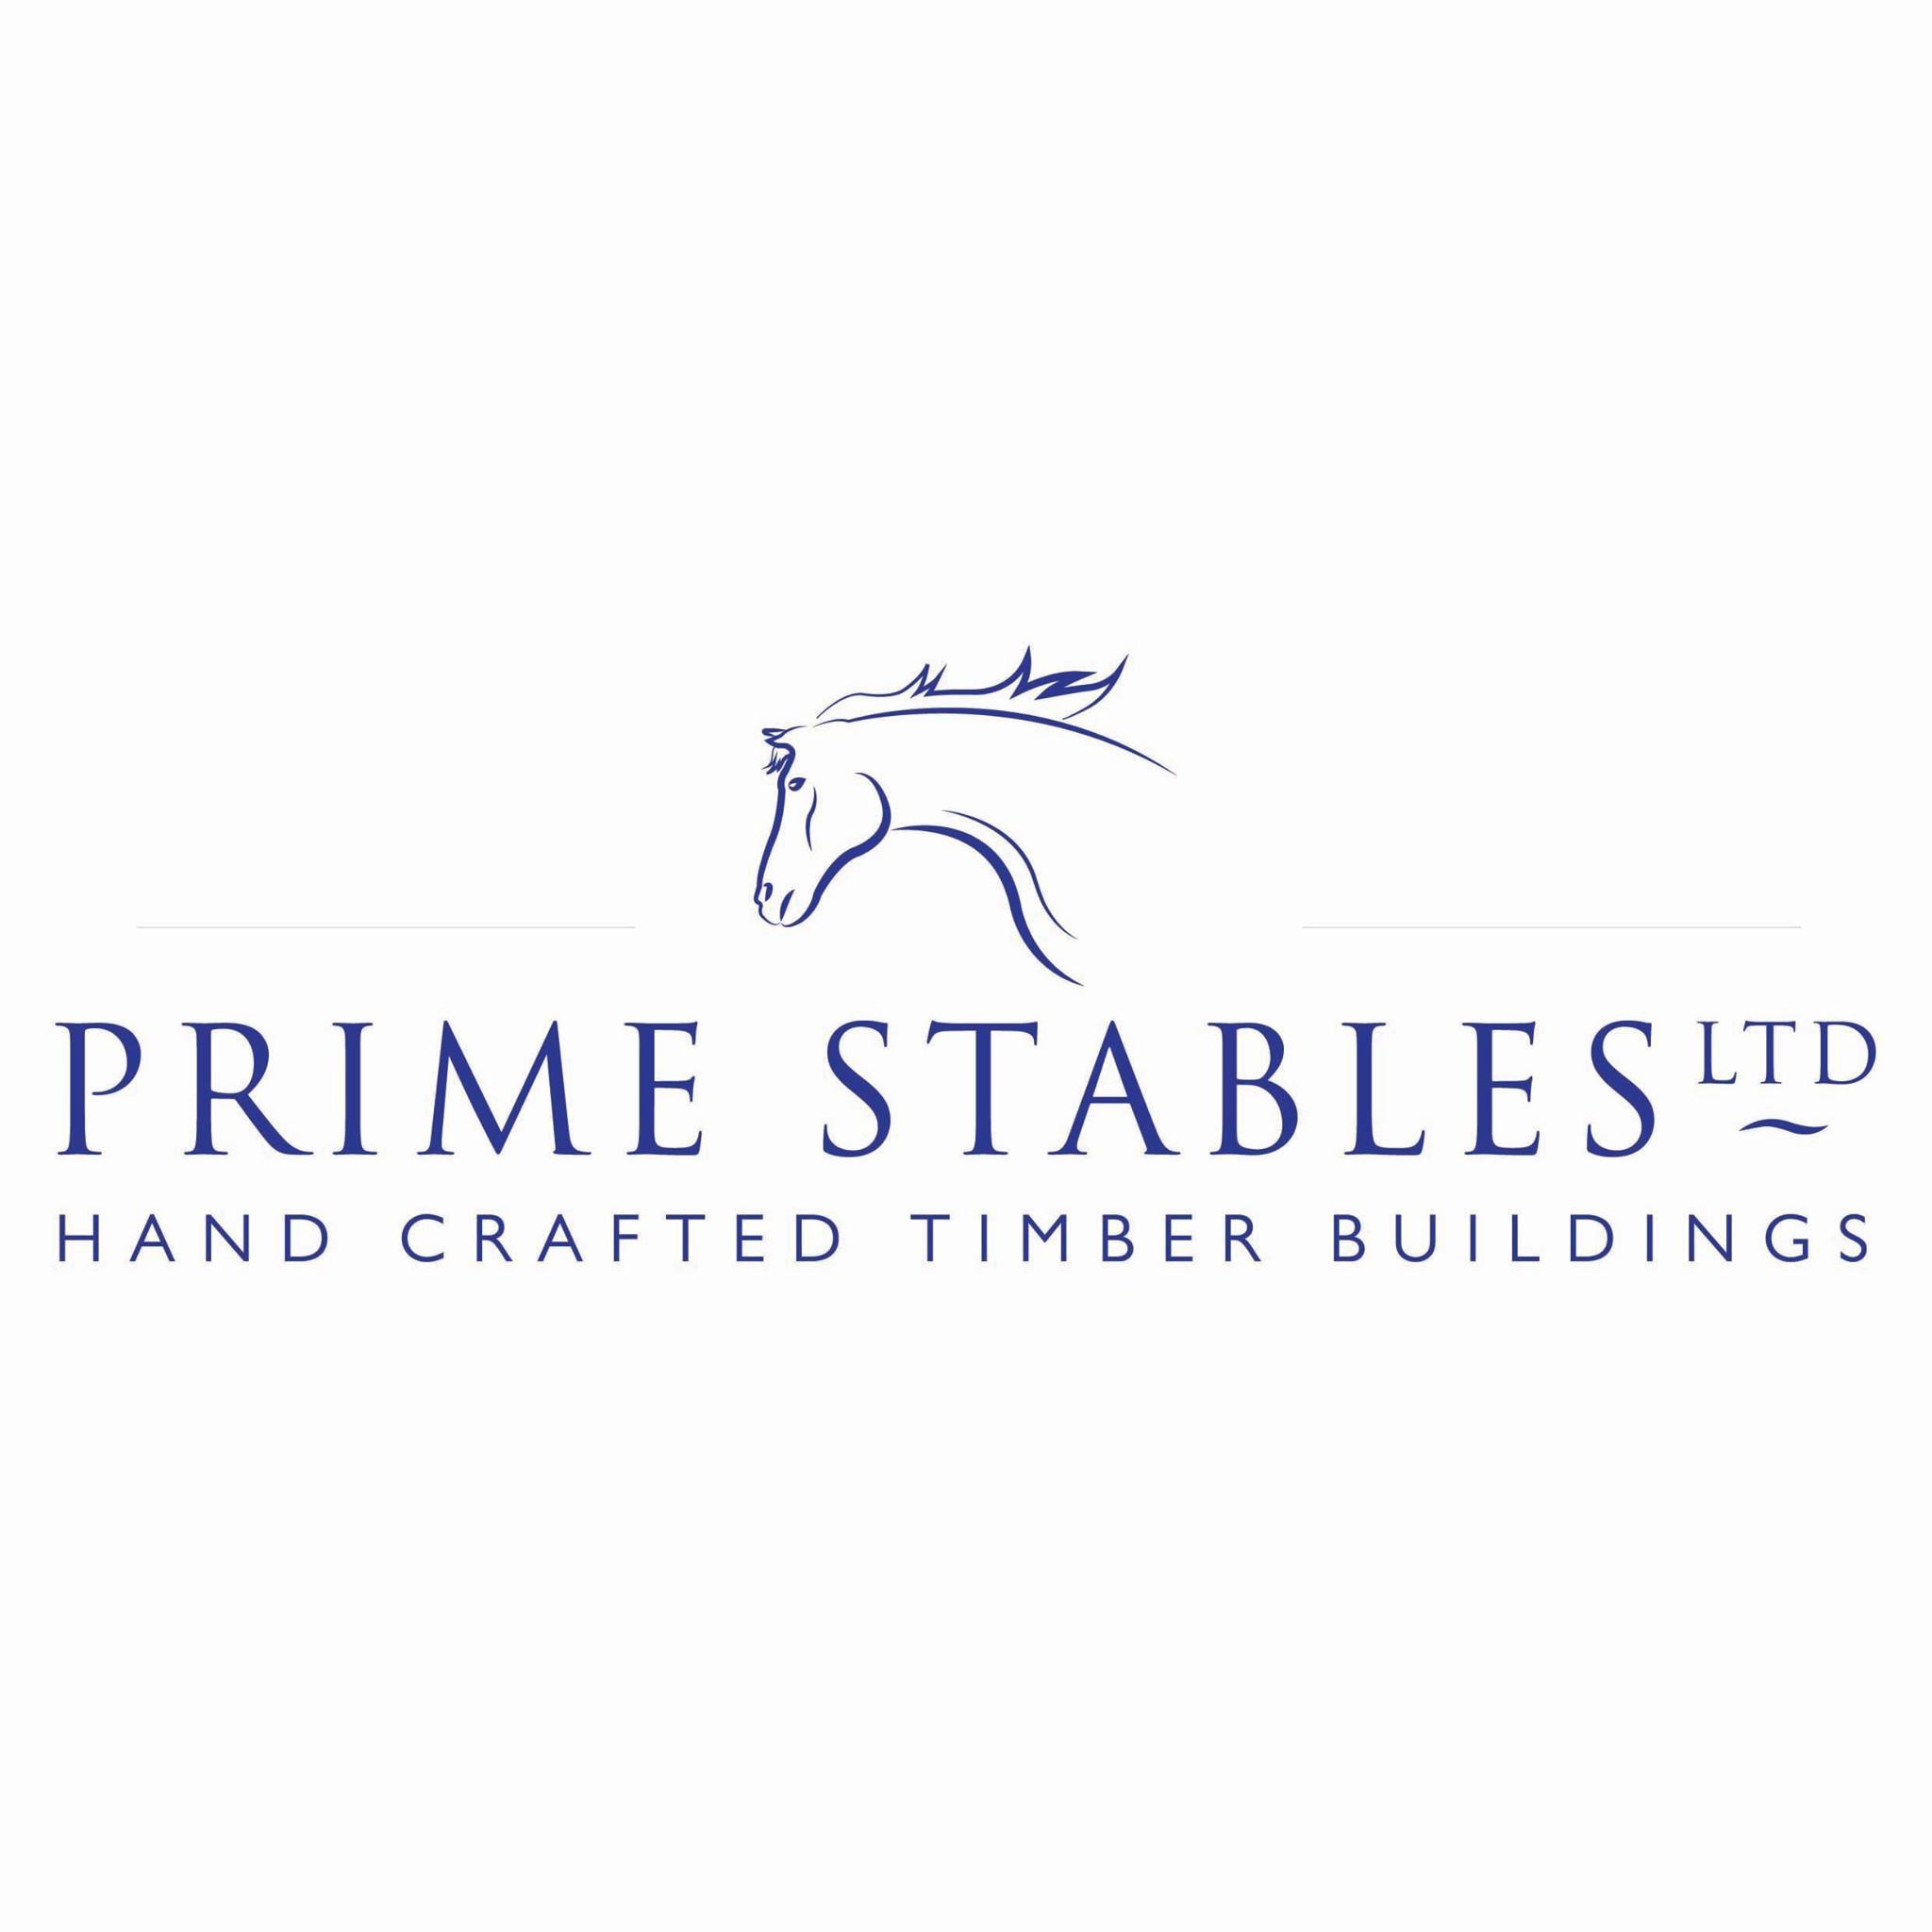 Prime Stables